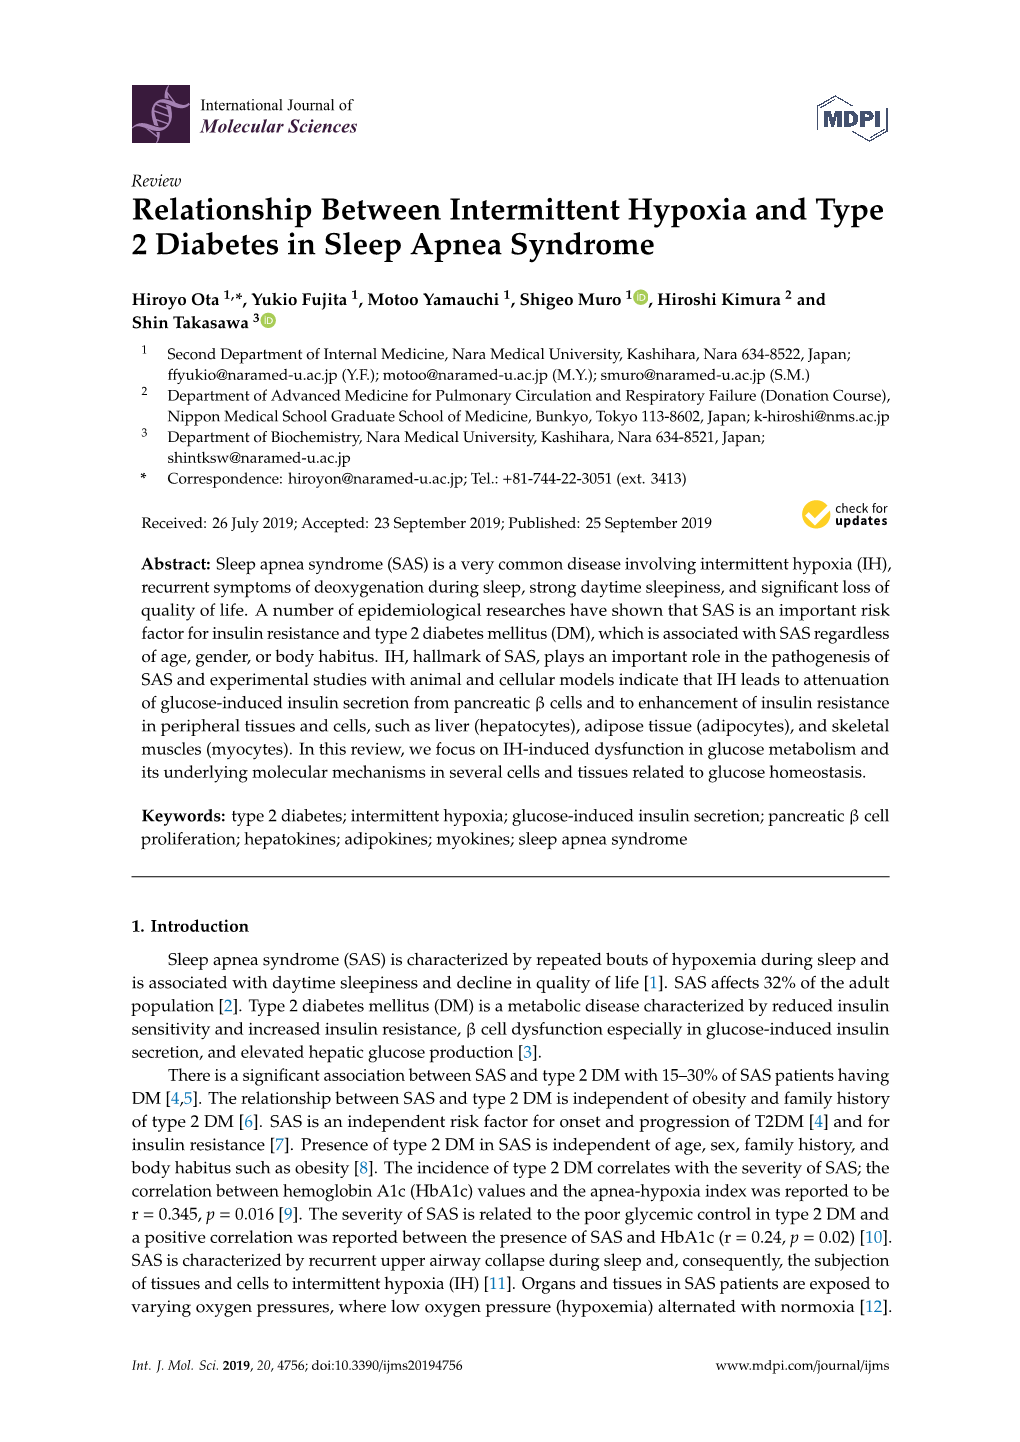 Relationship Between Intermittent Hypoxia and Type 2 Diabetes in Sleep Apnea Syndrome